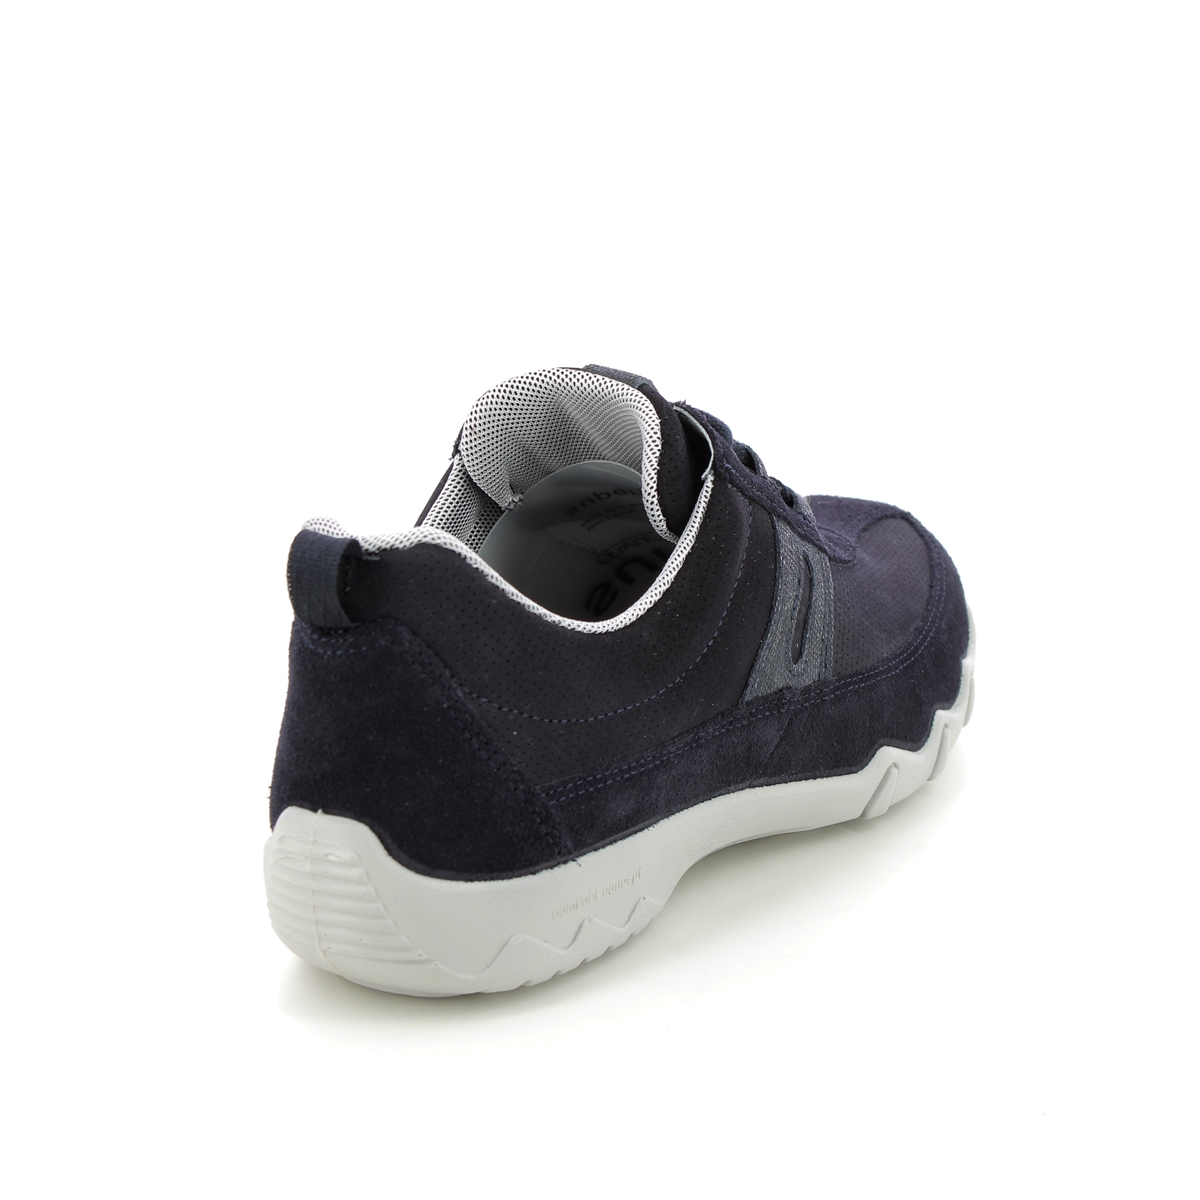 Hotter Leanne 2 Wide Navy Suede Womens lacing shoes 10112-73